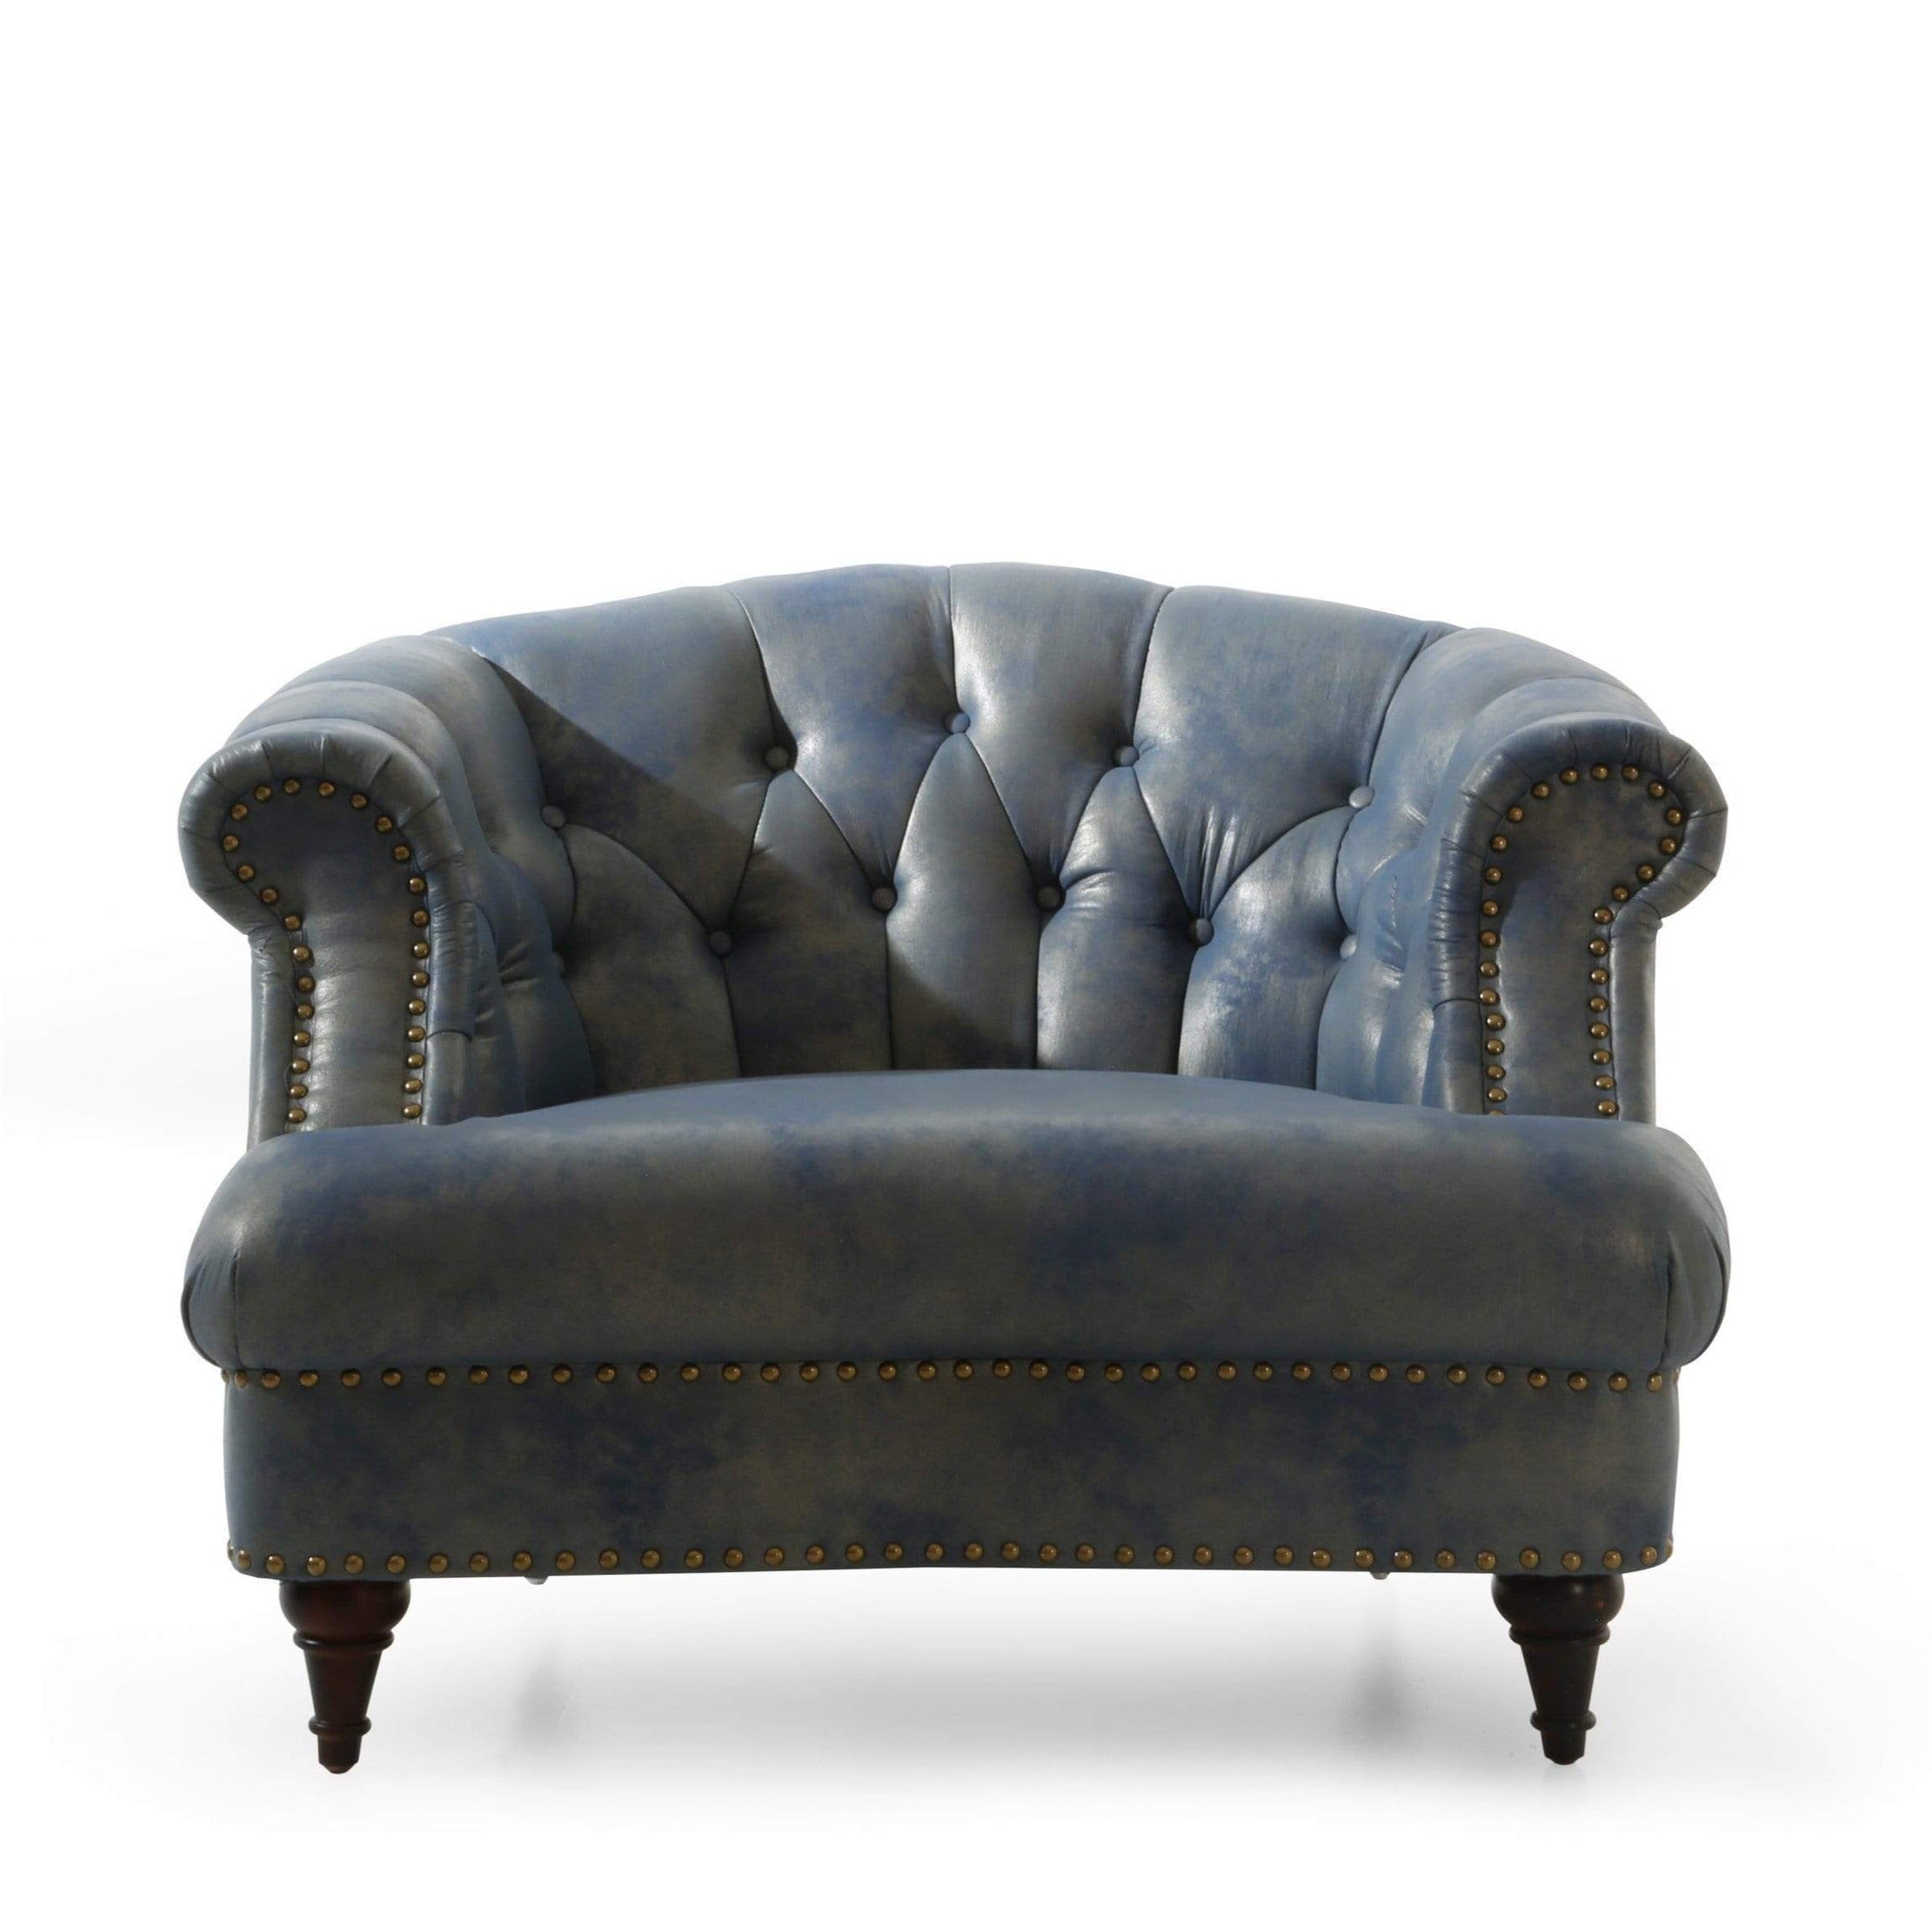 Embry Tufted PU Leather Club Chair